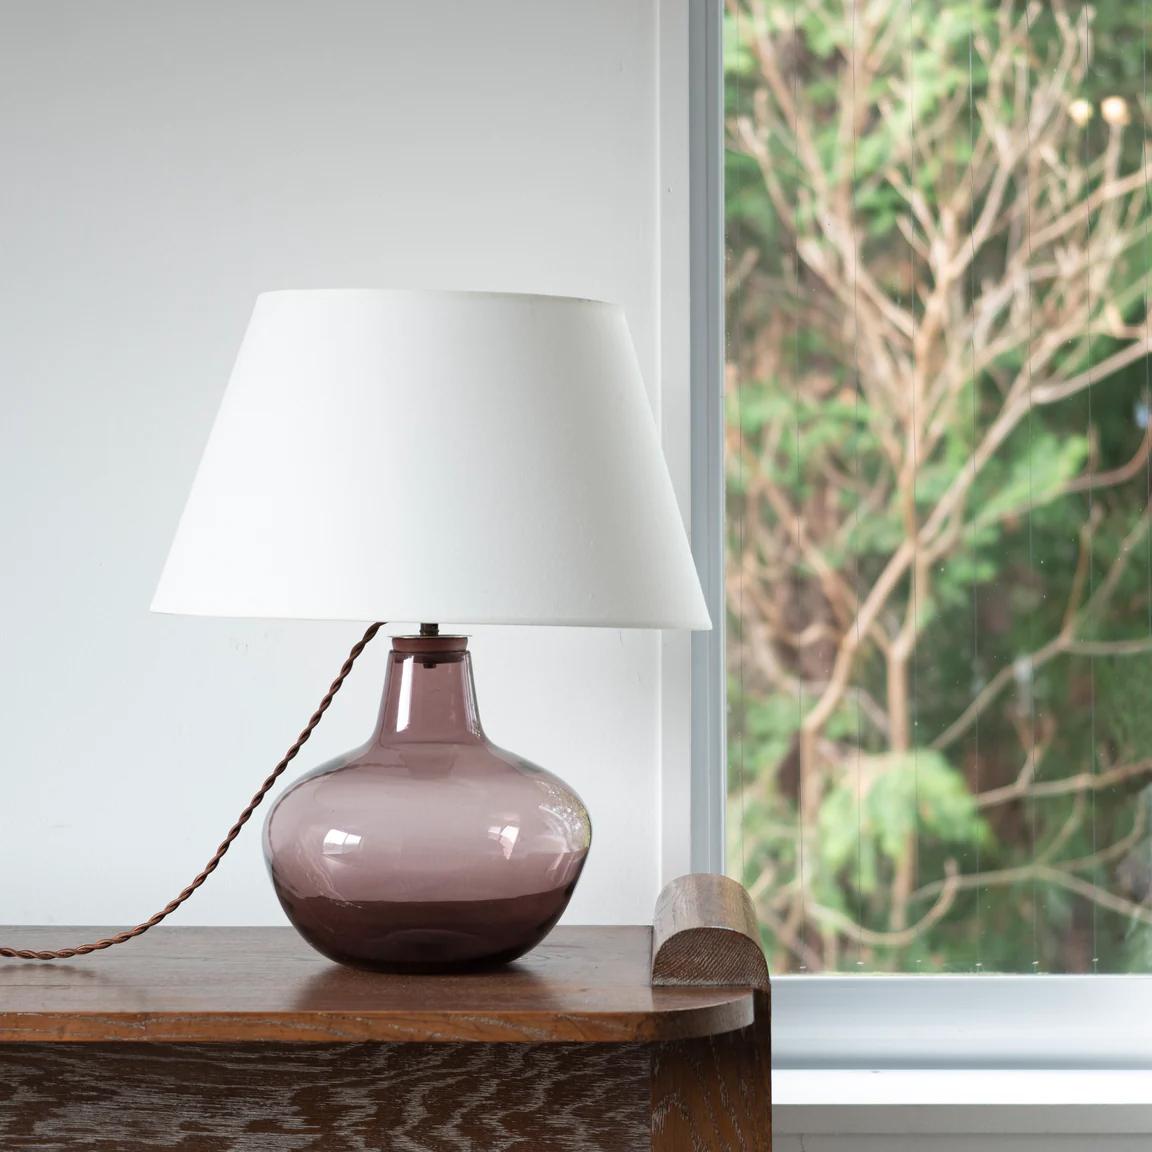 Handblown Glass Table Lamp by Claude Morin , 1981s , France 
Socket : B22
light bulb not include.